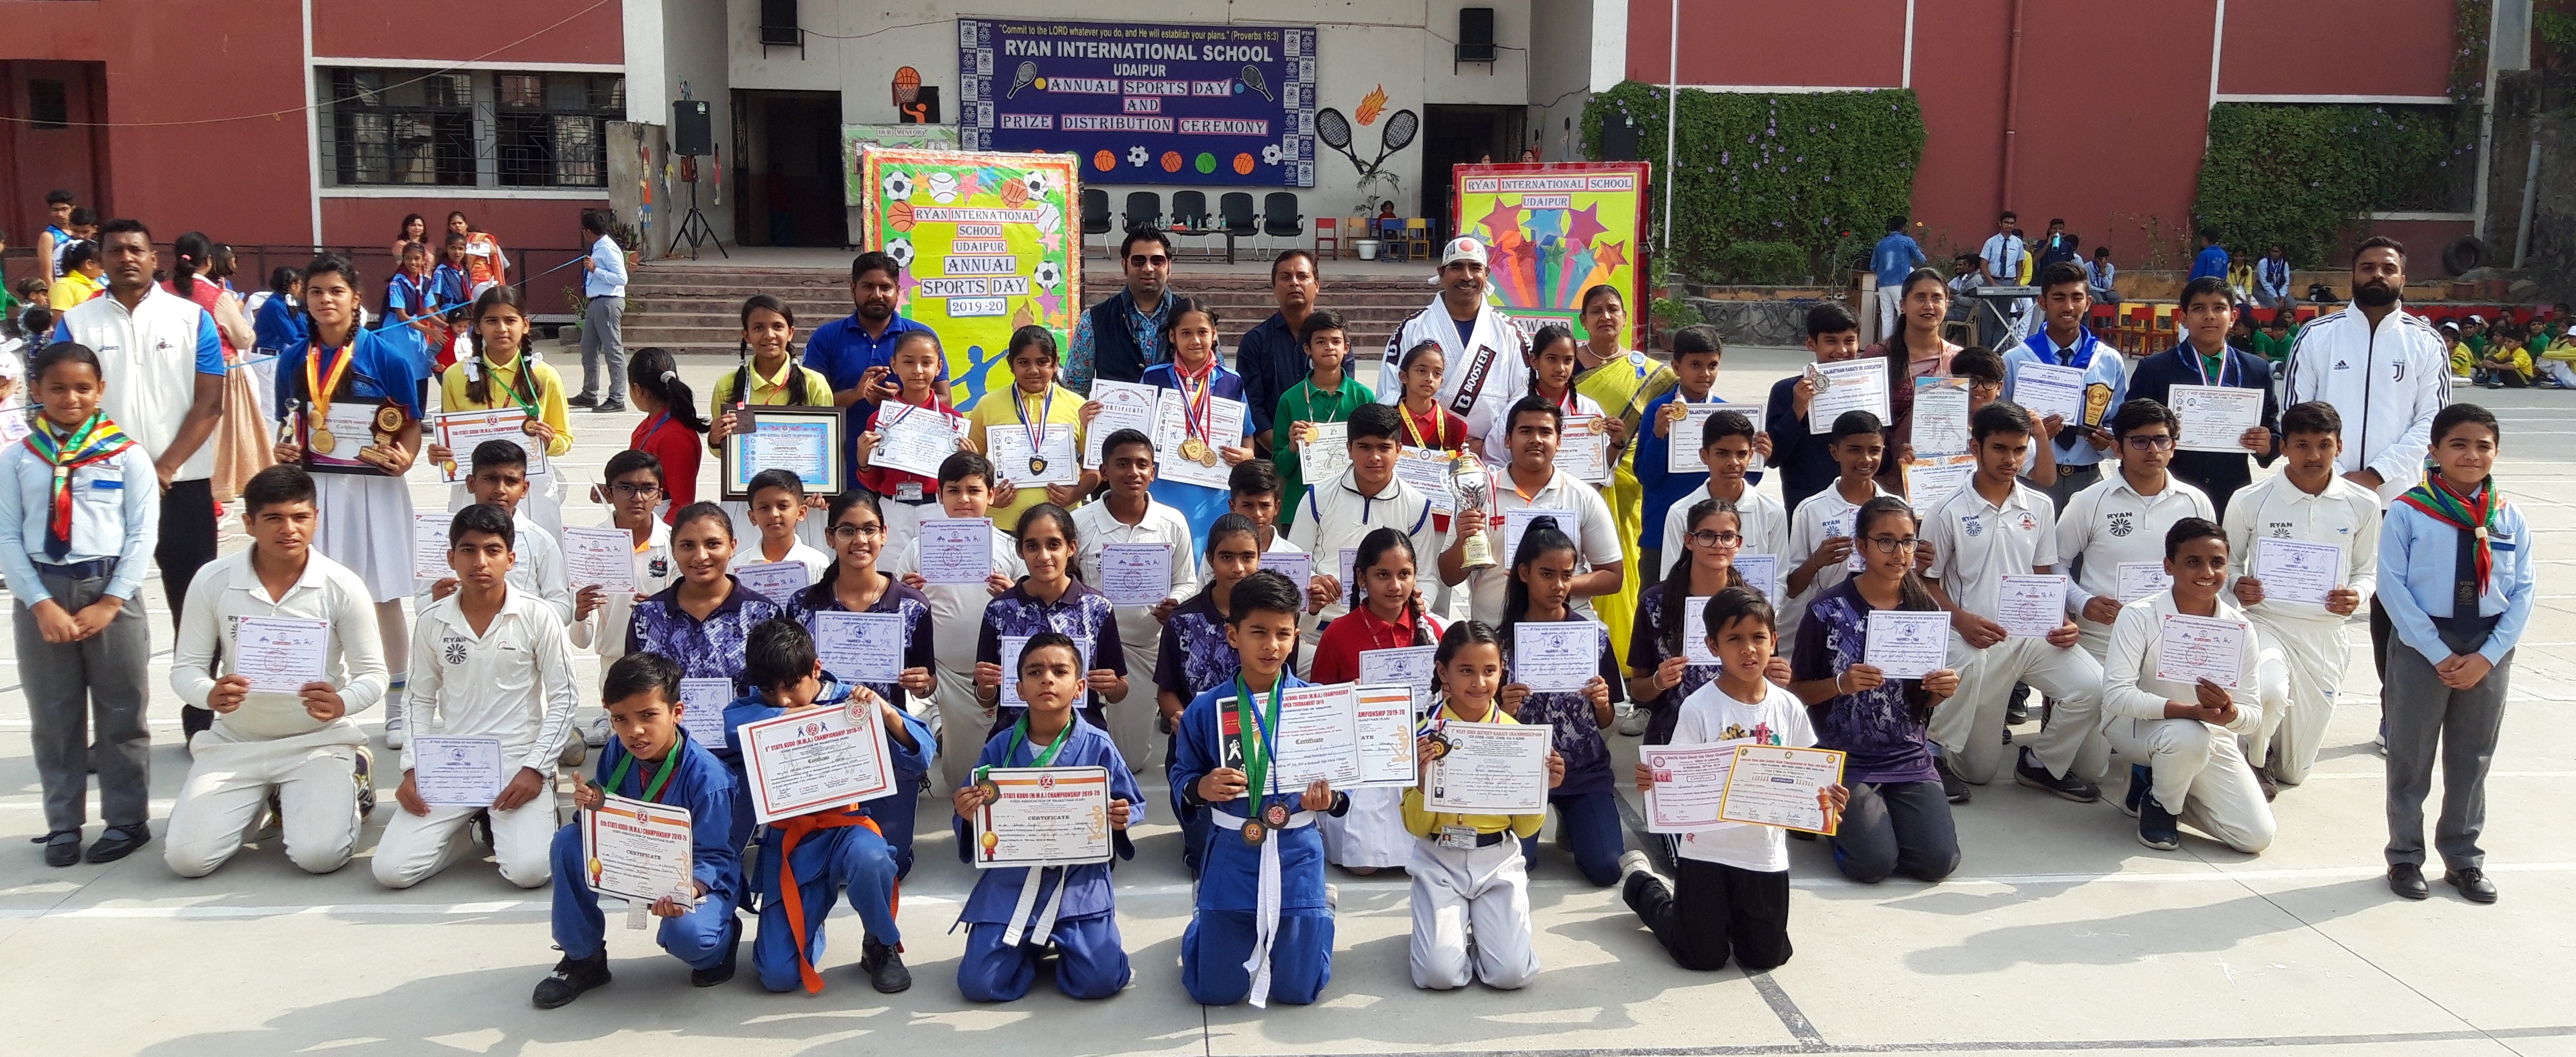 Ryan International School, Udaipur celebrated its Annual Sports Meet for Primary Wing -2019